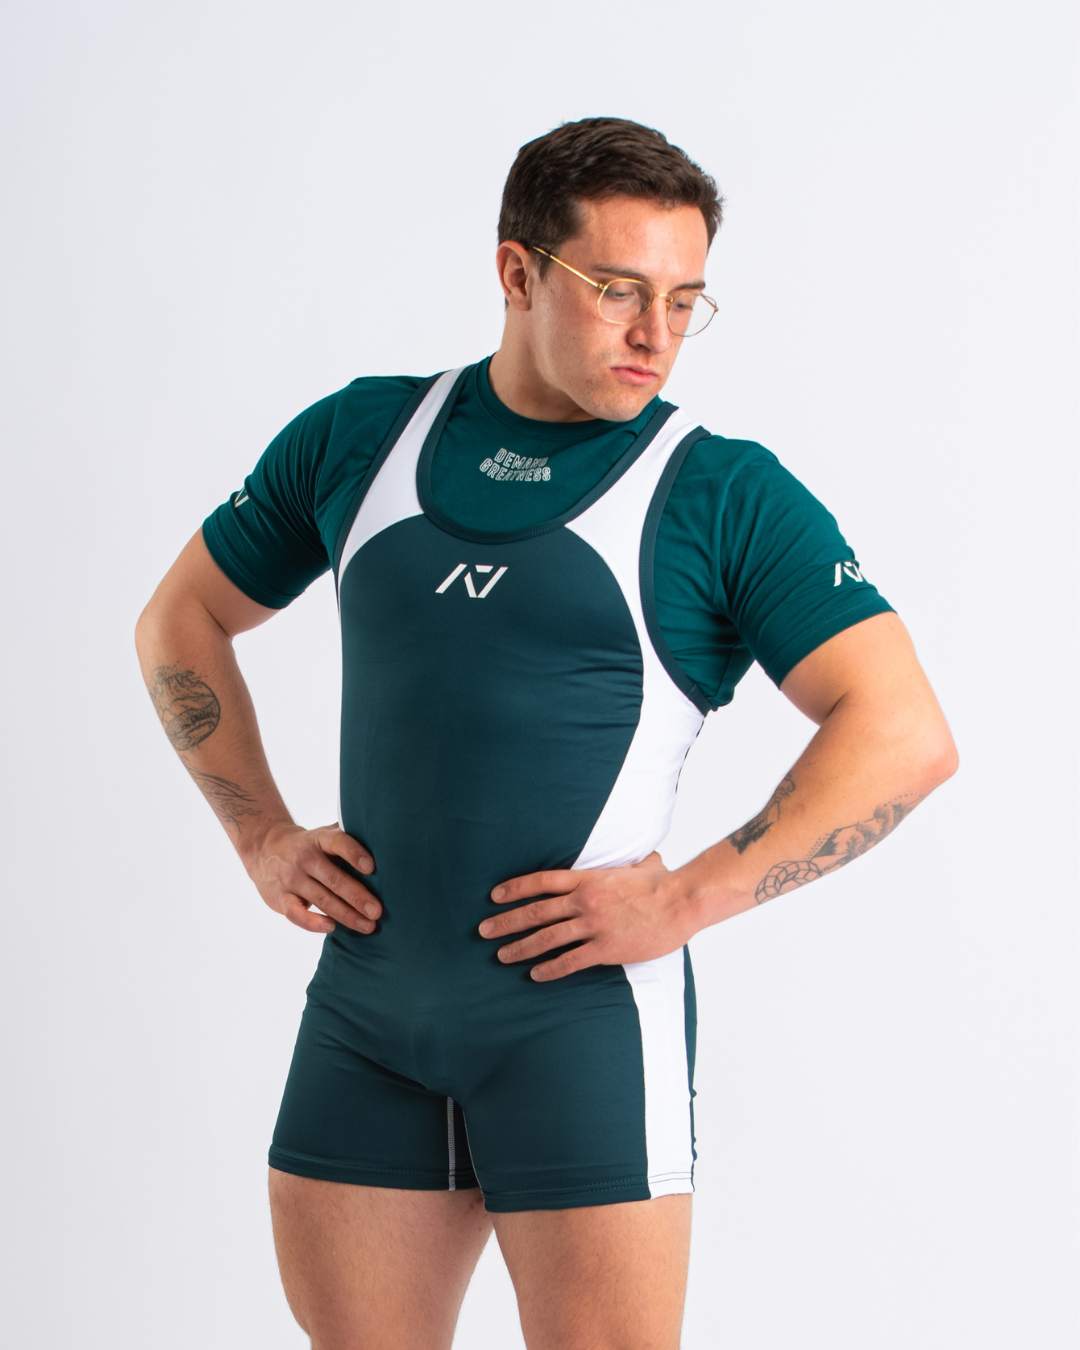 A7 IPF Approved Emerald Forás Luno singlet features extra lat mobility, side panel stitching to guide the squat depth level and curved panel design for a slimming look. The Women's cut singlet features a tapered waist and additional quad room. The IPF Approved Kit includes Luno Powerlifting Singlet, A7 Meet Shirt, A7 Zebra Wrist Wraps, A7 Deadlift Socks, Hourglass Knee Sleeves (Stiff Knee Sleeves and Rigor Mortis Knee Sleeves). All A7 Powerlifting Equipment shipping to UK, Norway, Switzerland and Iceland.